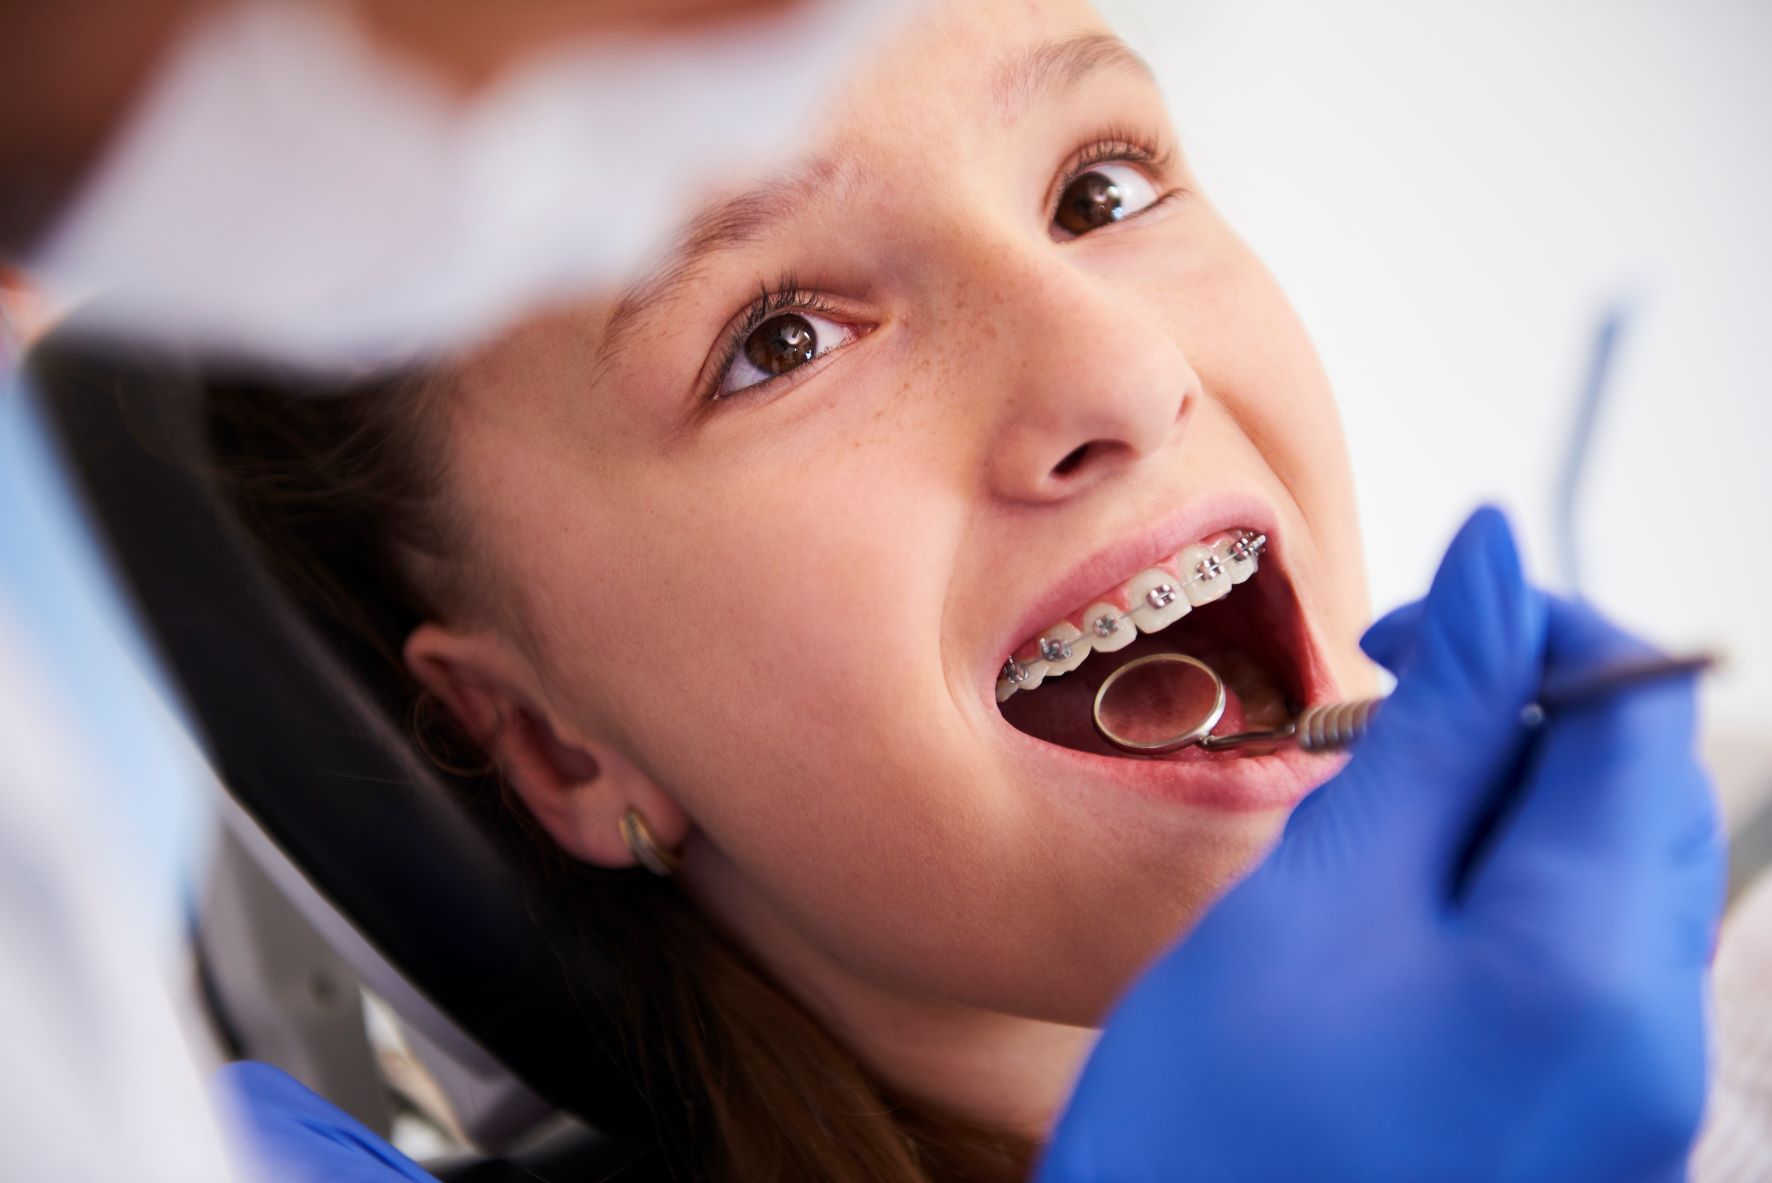 23 girl-with-braces-during-routine-dental-examination.jpg